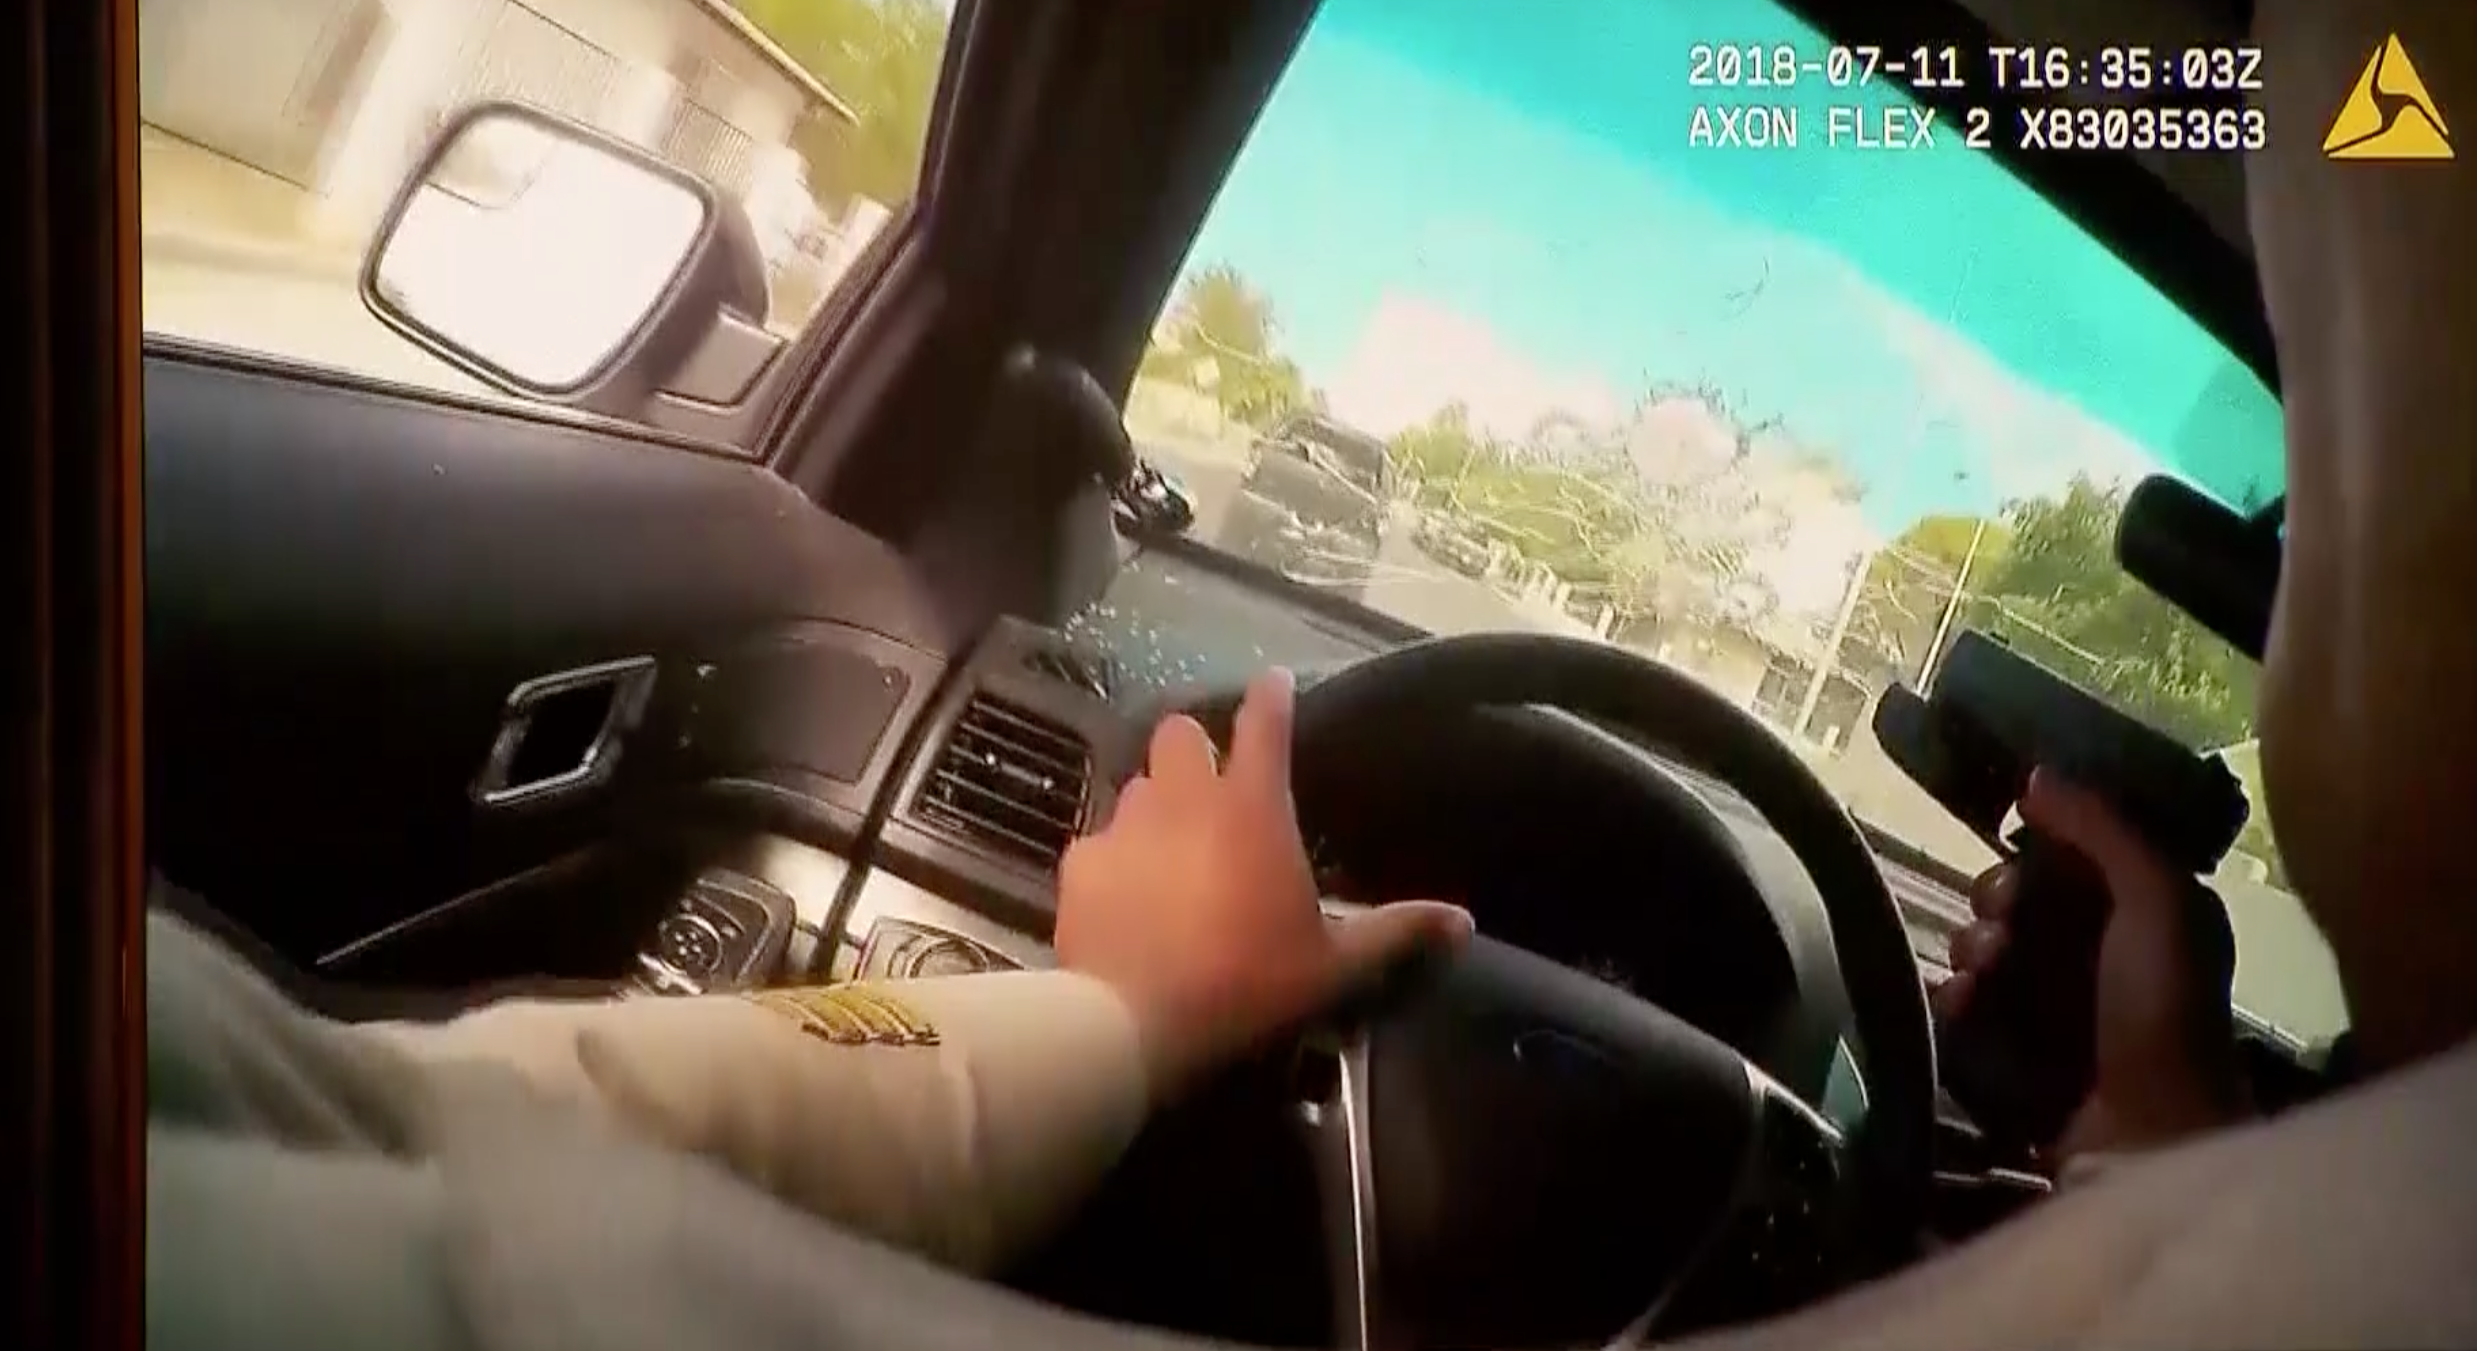 Dramatic Police Chase Video Shows Cop Firing At Suspects Through Car Window on BET News.